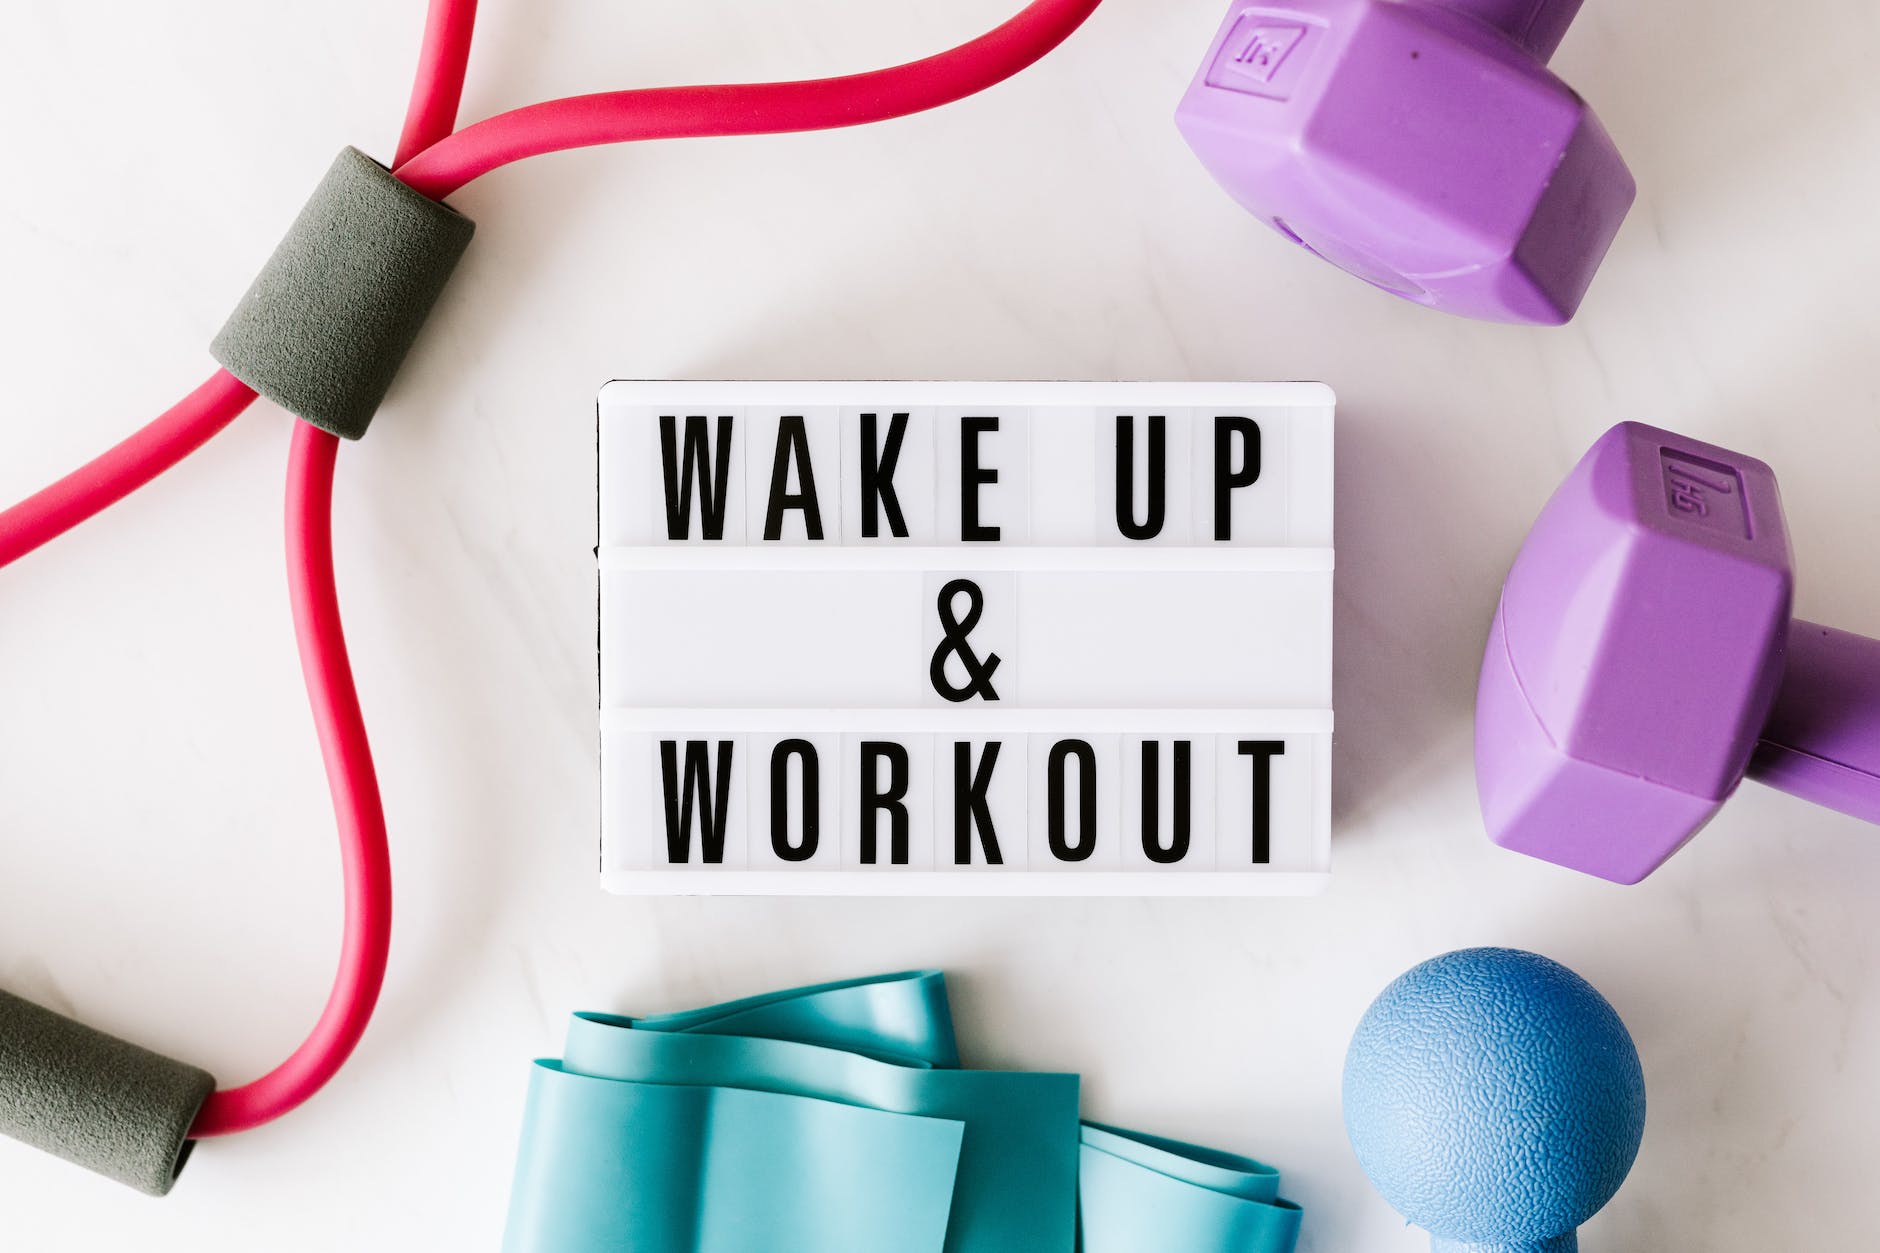 wake up and workout title on light box surface surrounded by colorful sport equipment